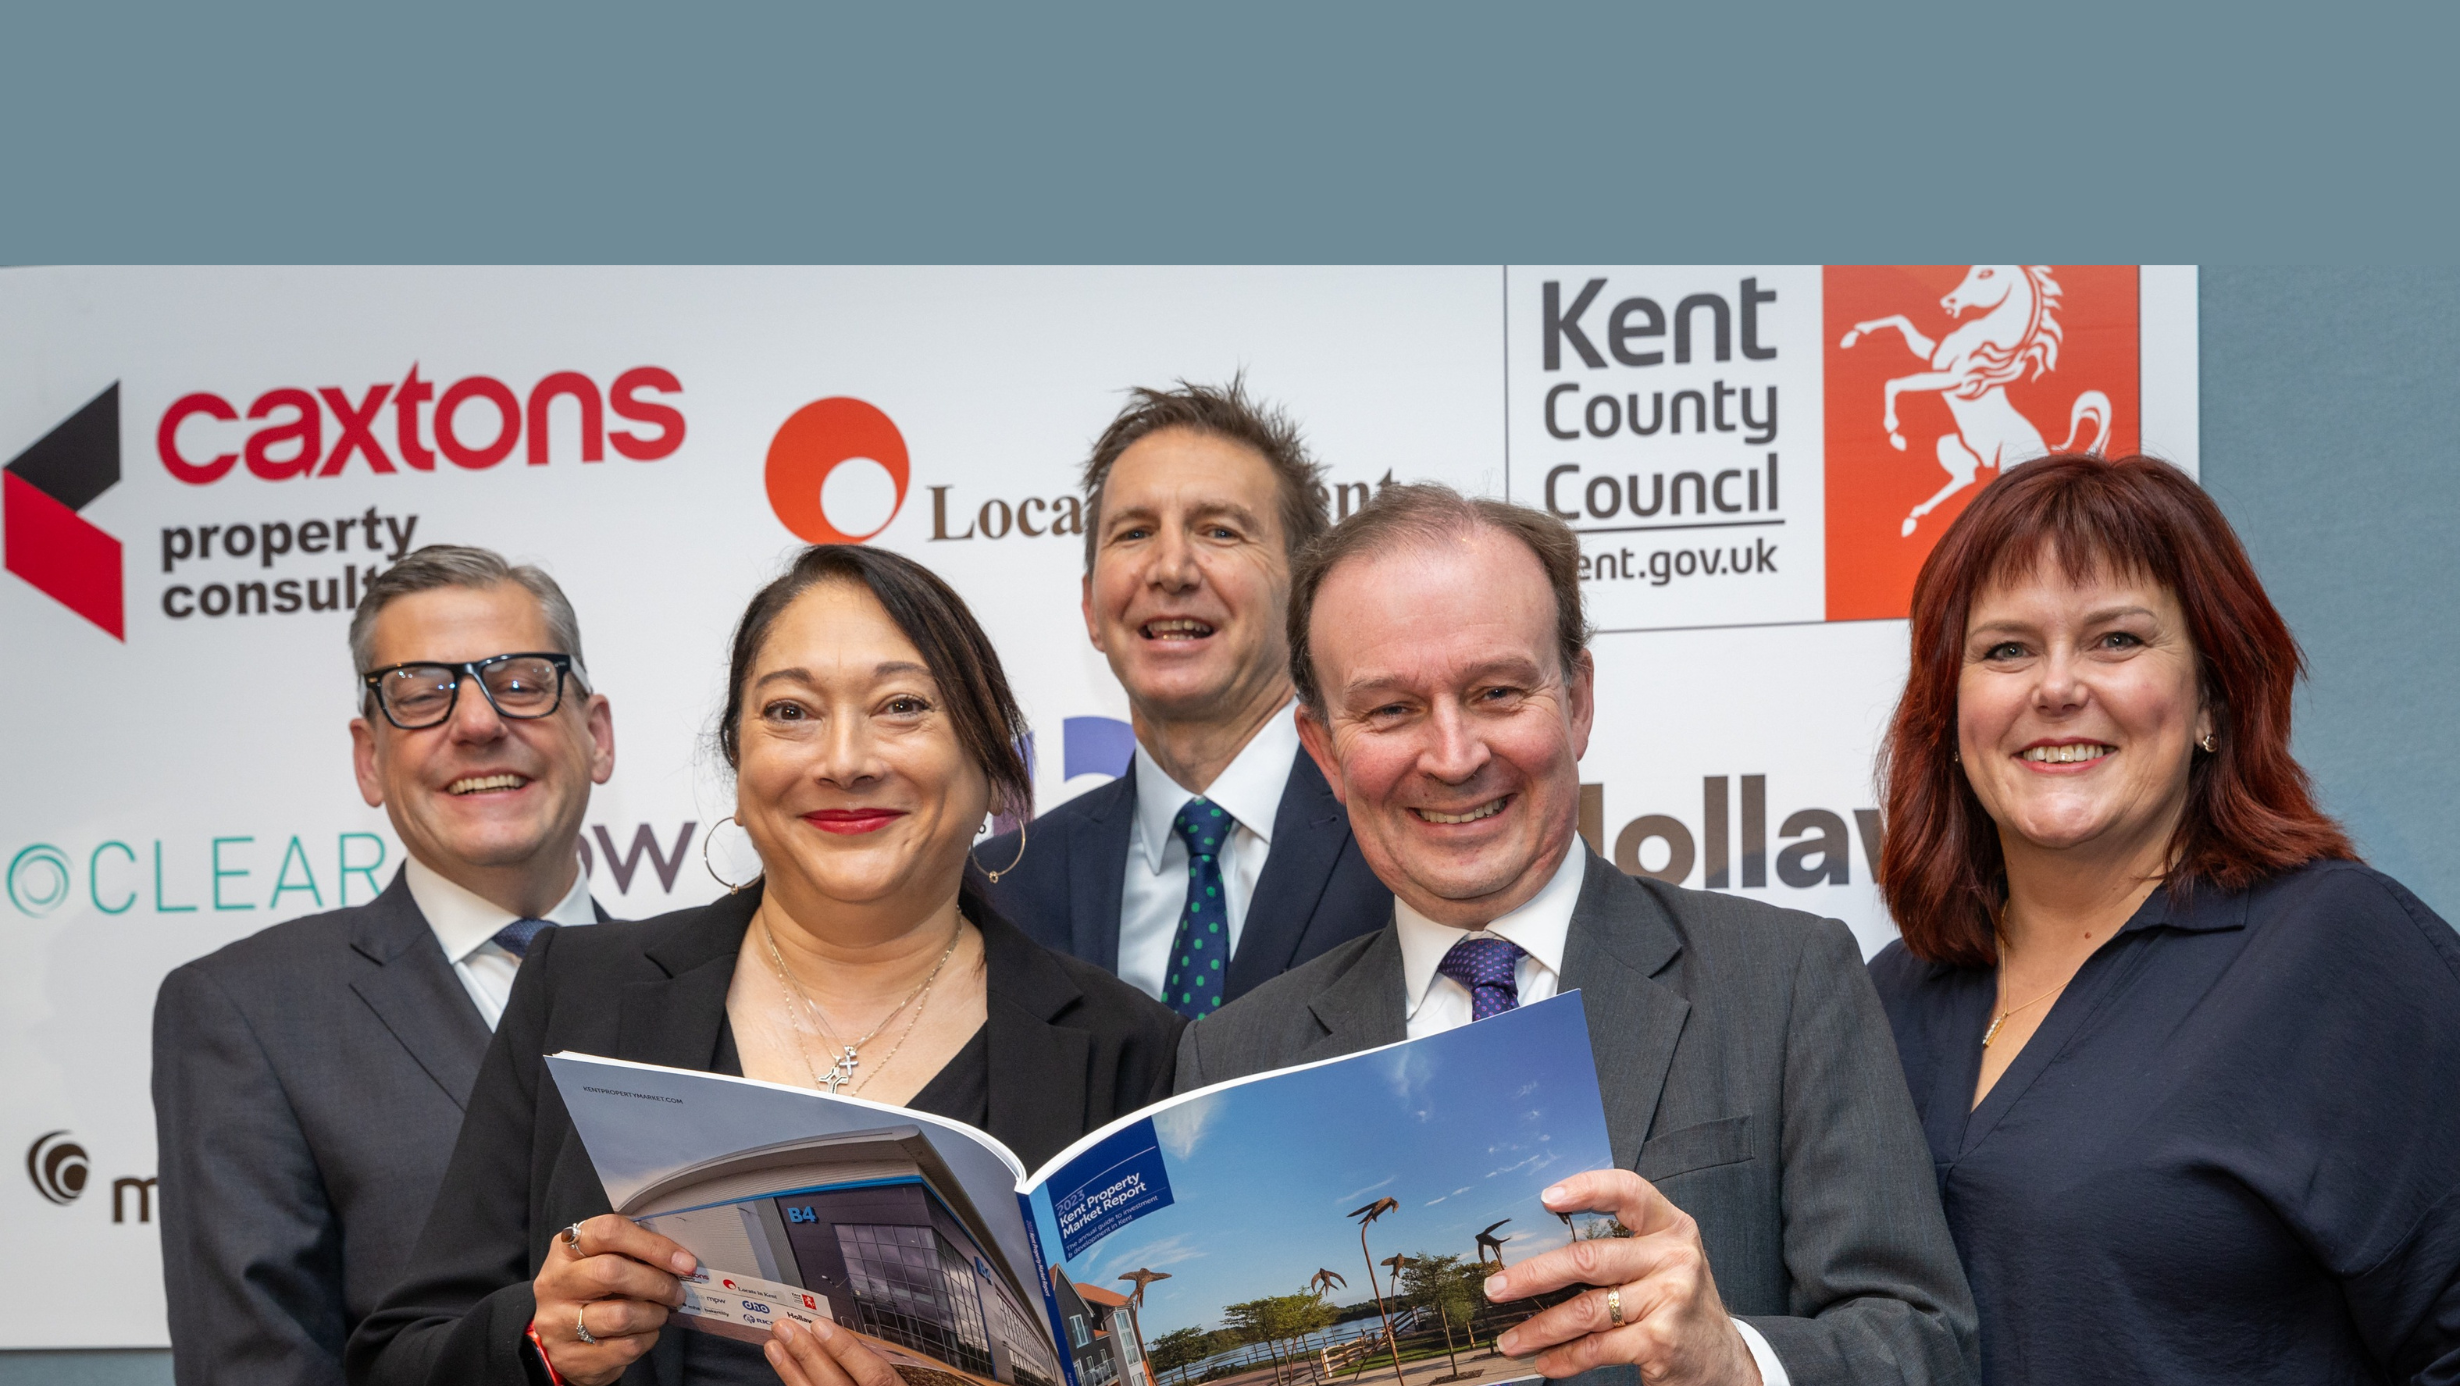 Kent’s property market recovery reflects changing ways of working and living